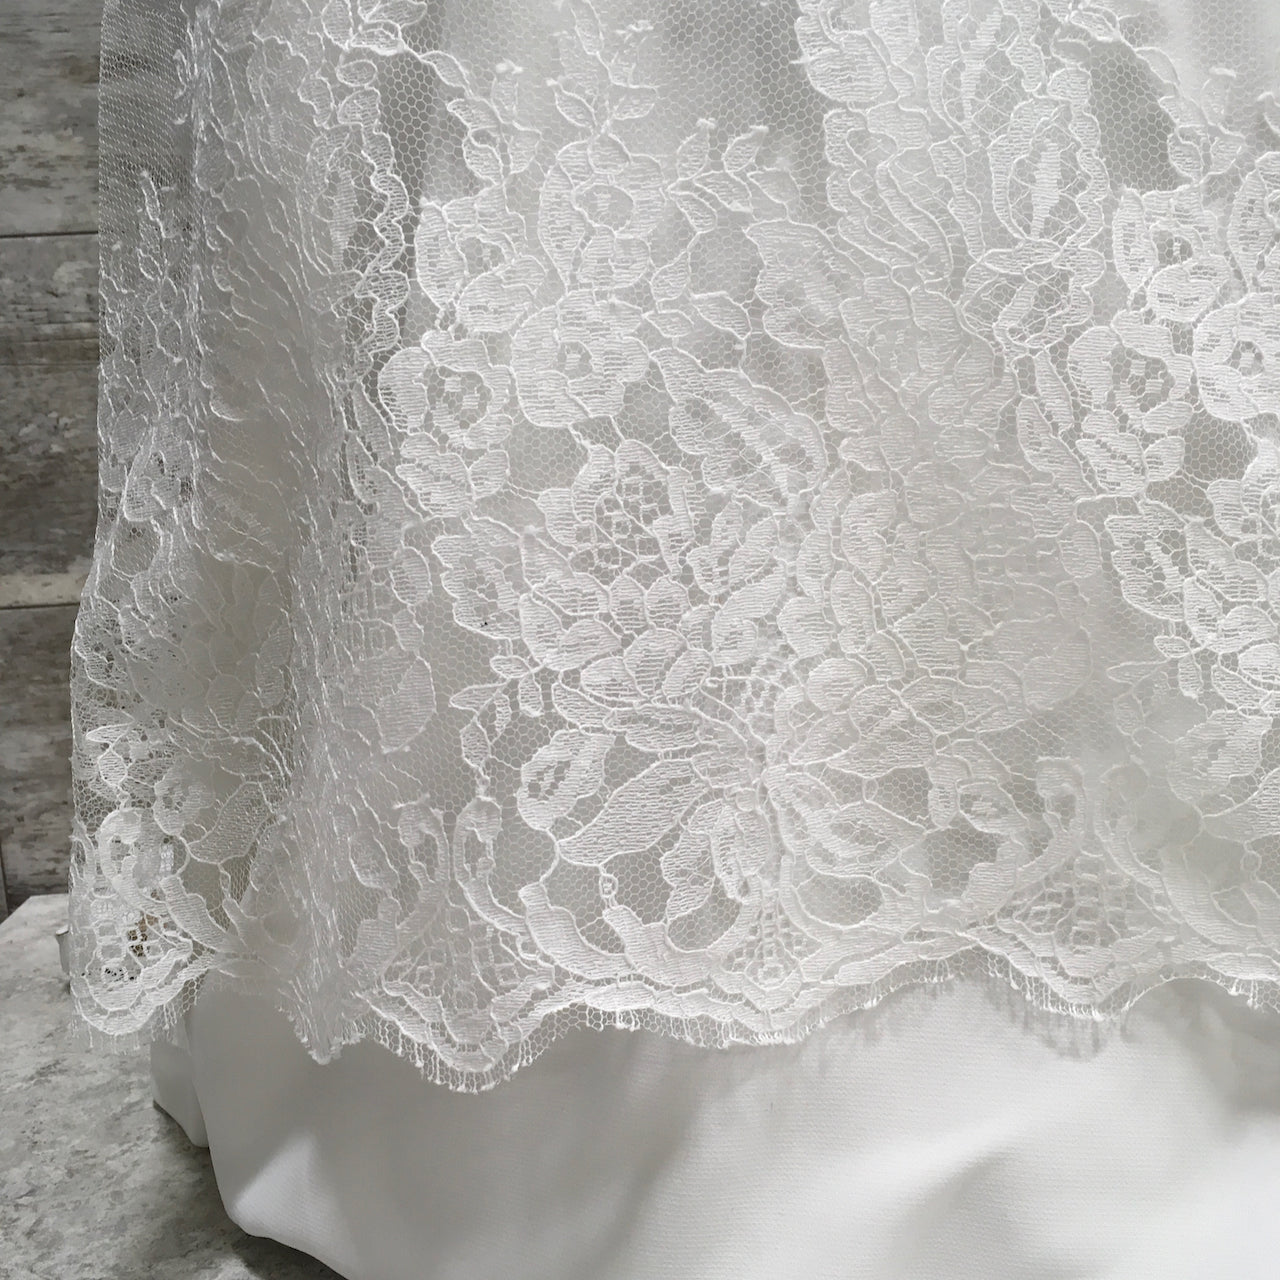 Bridal Lace Petite Space - Sold by the half yard